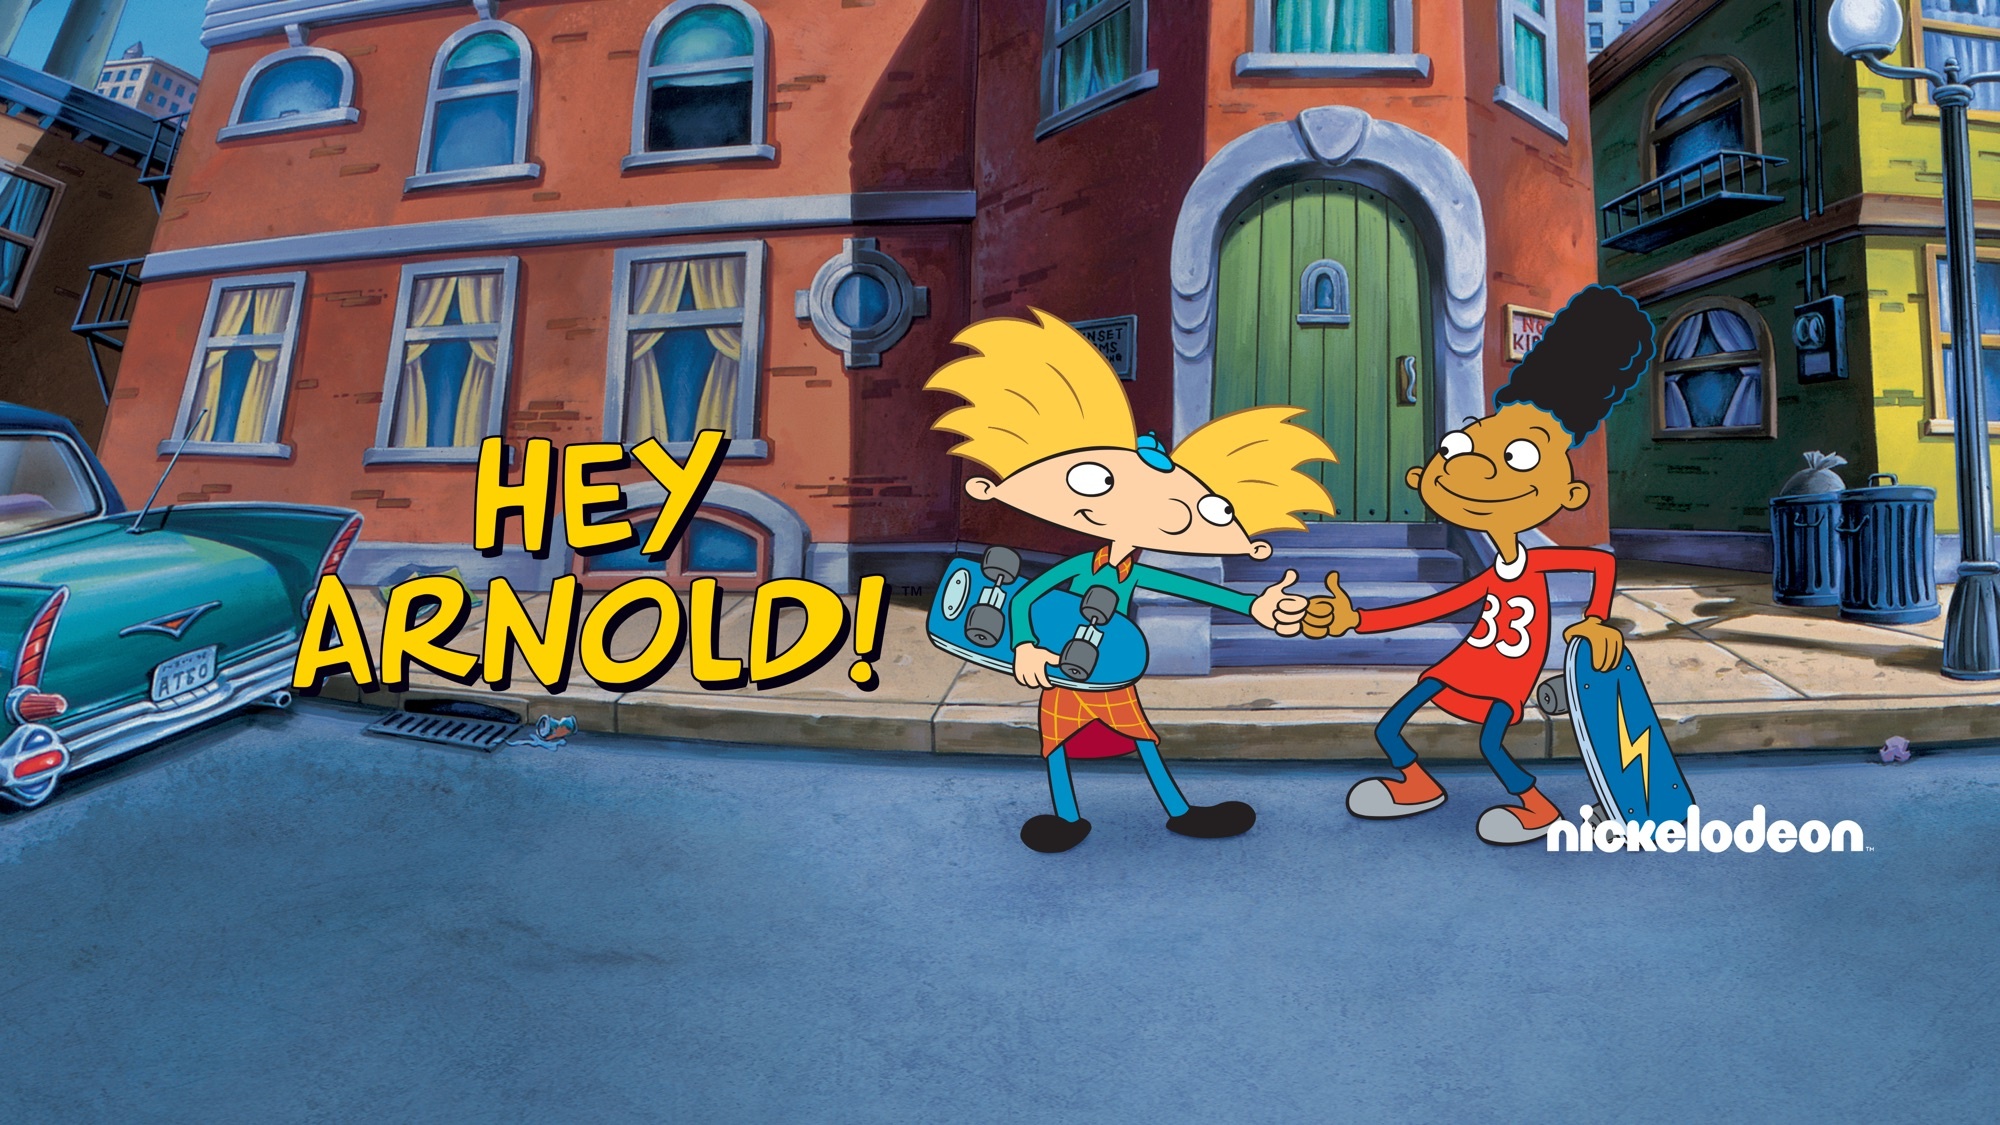 Hey Arnold HD wallpaper, Awesome background, Hey Arnold animation, 2000x1130 HD Desktop